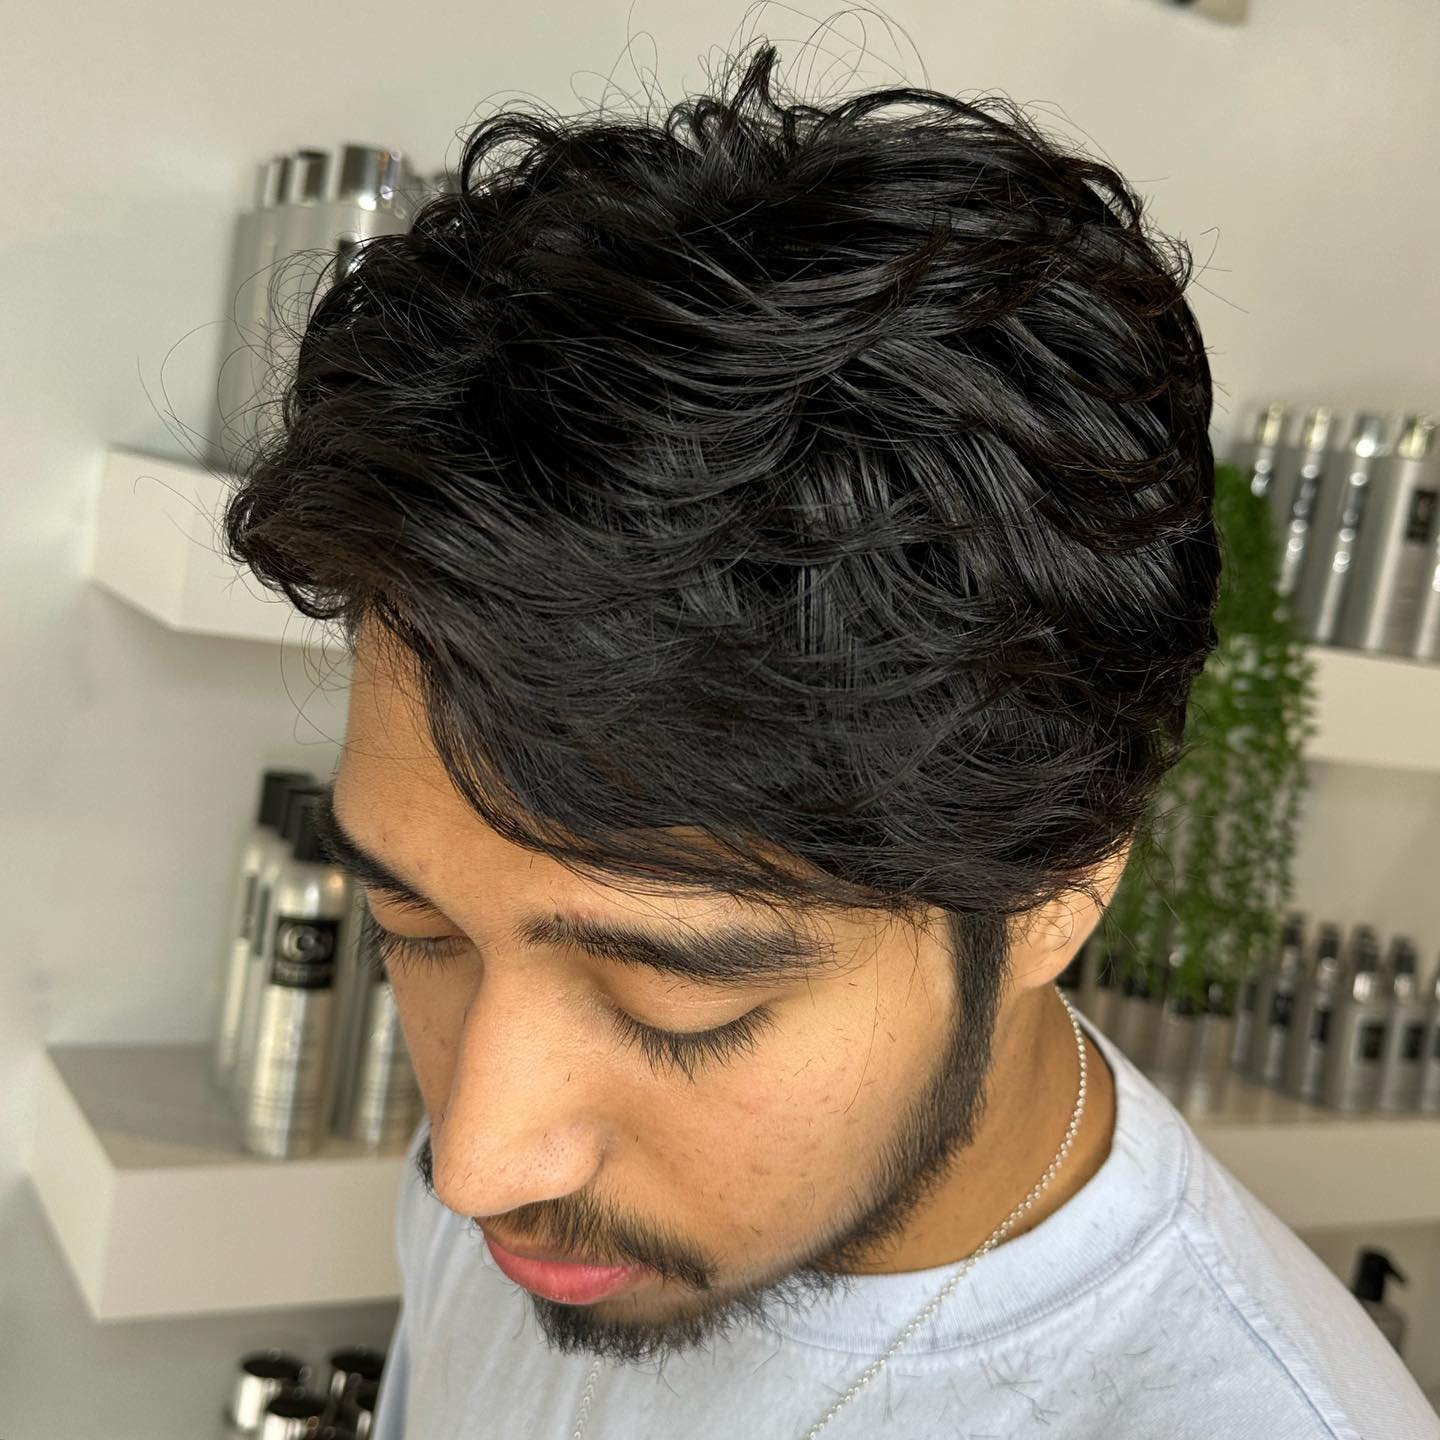 Messy hairstyle for Men 89 Medium messy hairstyles for guys | Messy fade haircut | Messy hairstyles for medium hair Messy hairstyles for Men